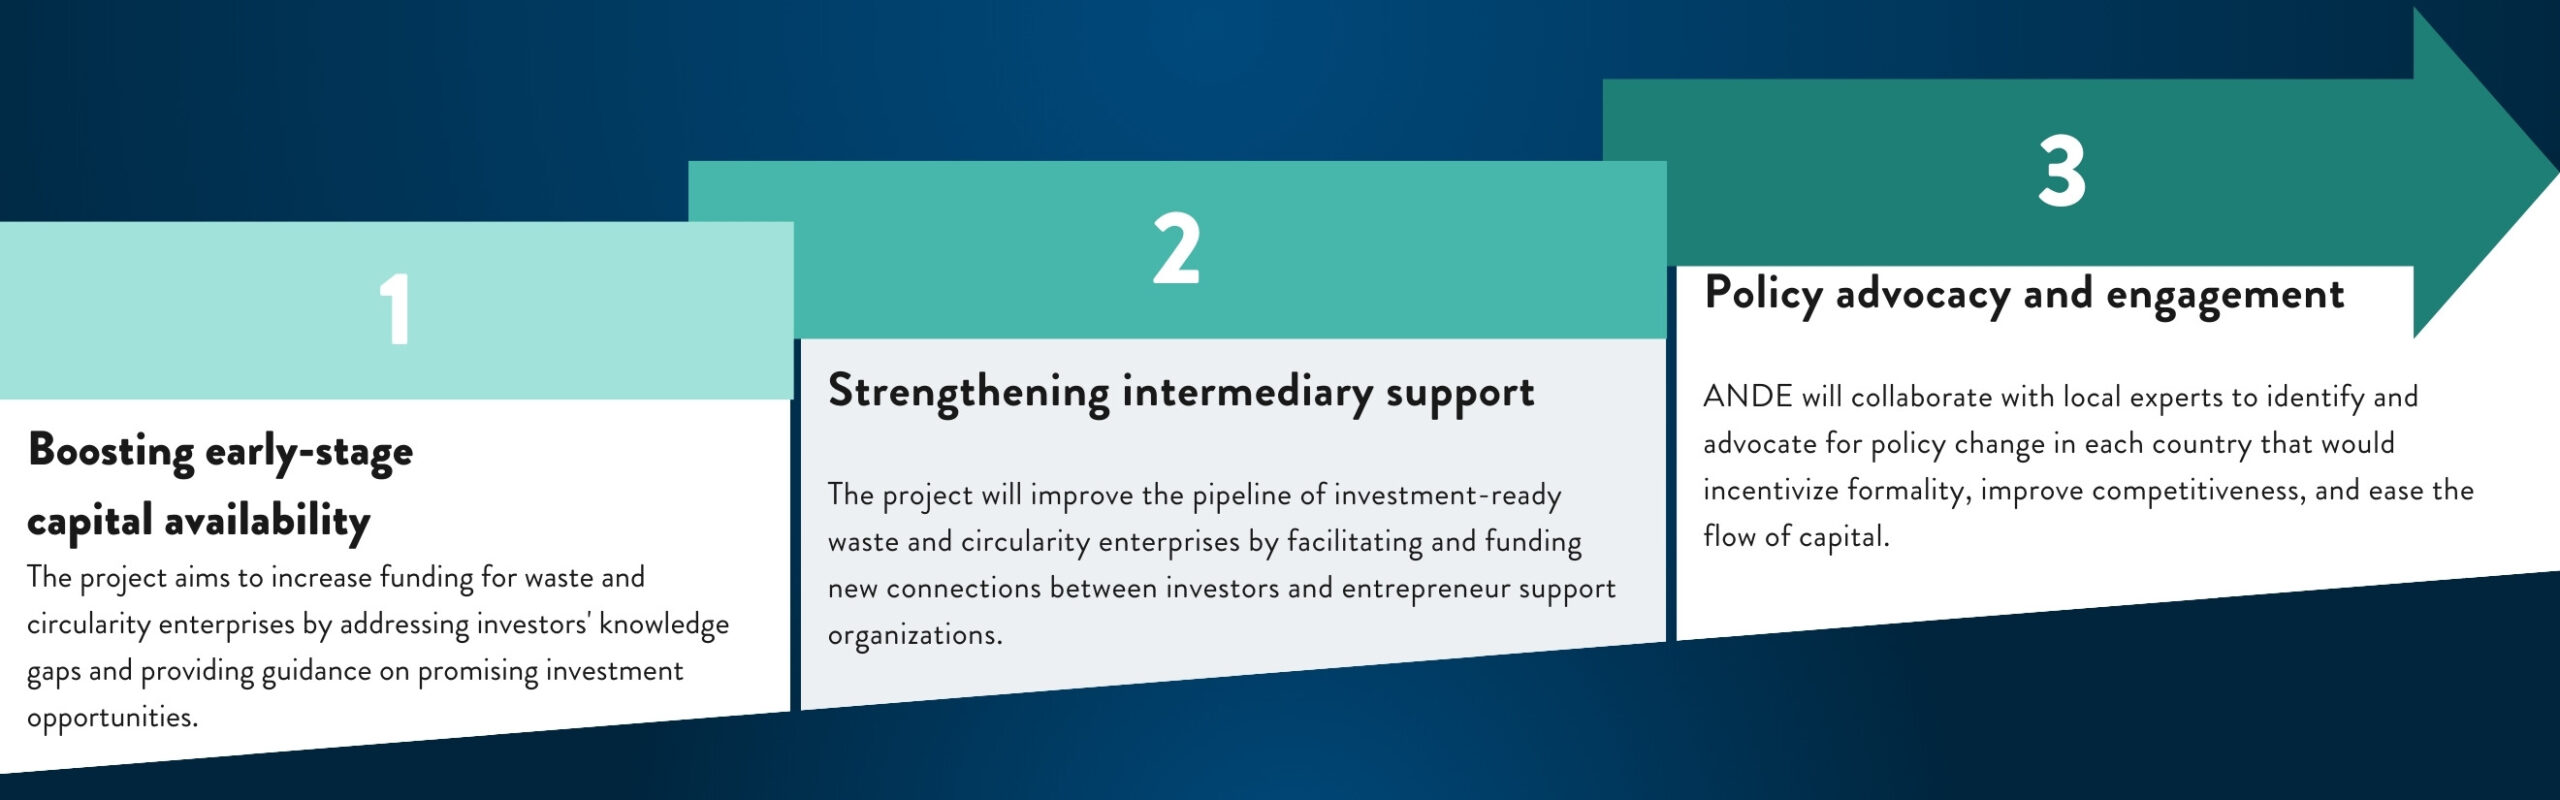 The project will address these challenges by: Boosting early-stage capital availability The project aims to increase funding for waste and circularity enterprises by addressing investors' knowledge gaps and provide guidance on promising investment opportunities. Strengthening intermediary support By facilitating and funding new connections between investors and entrepreneur support organizations, the project will improve the pipeline of investment-ready waste and circularity enterprises. Policy advocacy and engagement ANDE will collaborate with local experts to identify and advocate for policy change in each country that would incentivize formality, improve competitiveness, and ease the flow of capital.